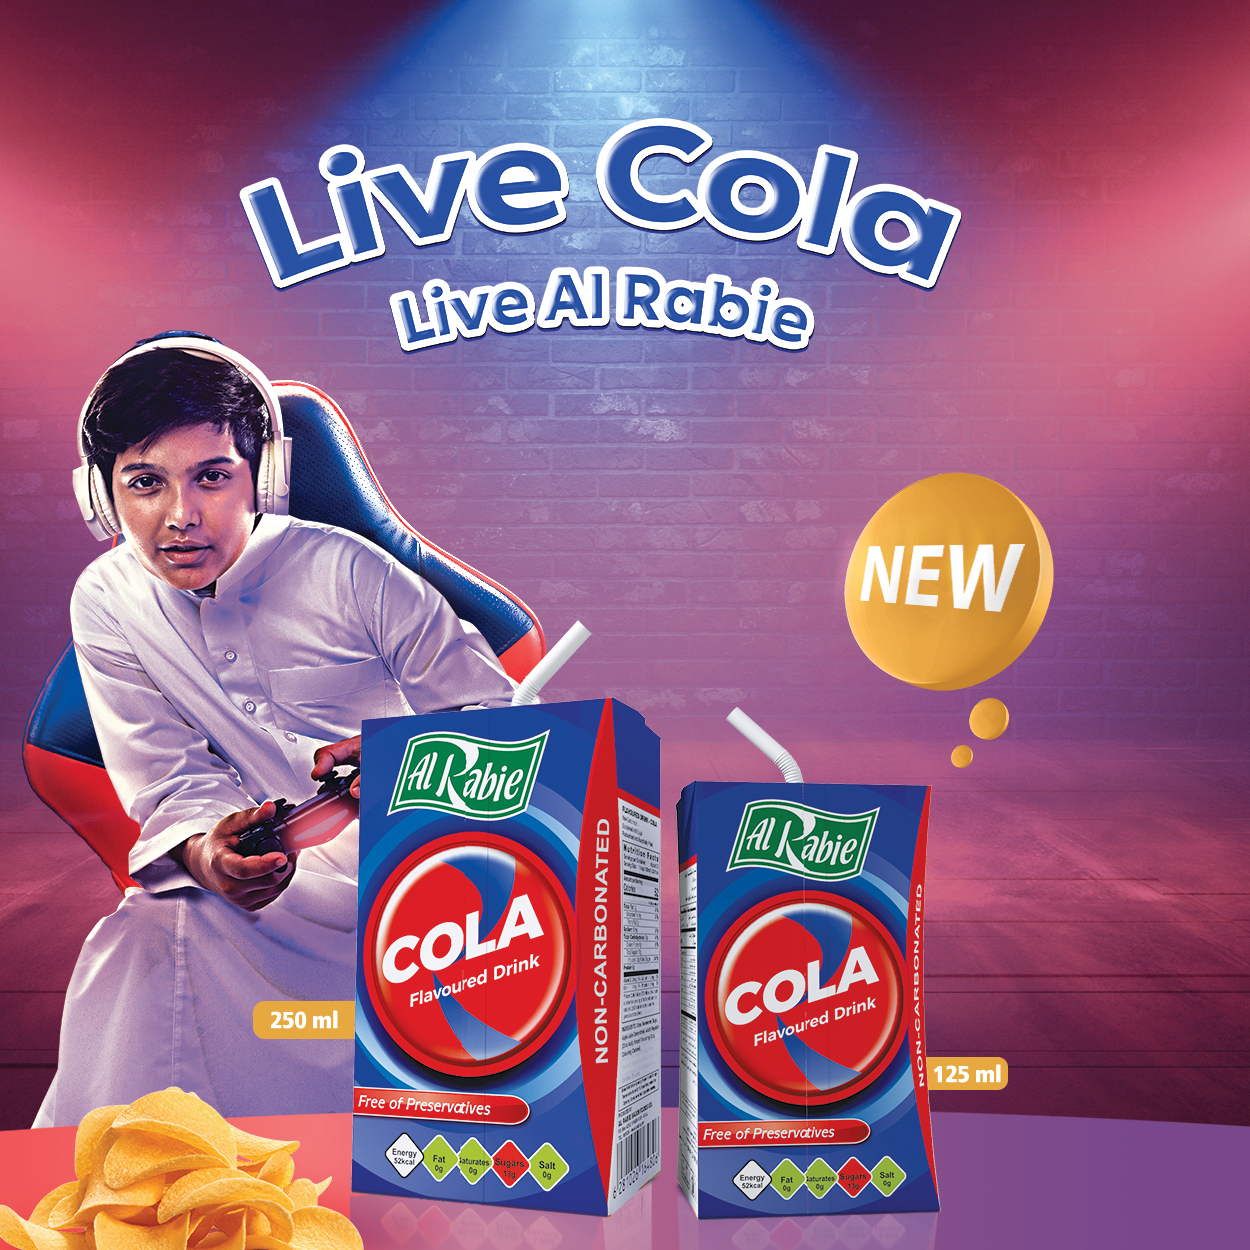 Live COLA, Live AL RABIE ! Discover the NEW and amazing taste of  Al Rabie’s Non-Carbonate COLA Drink !